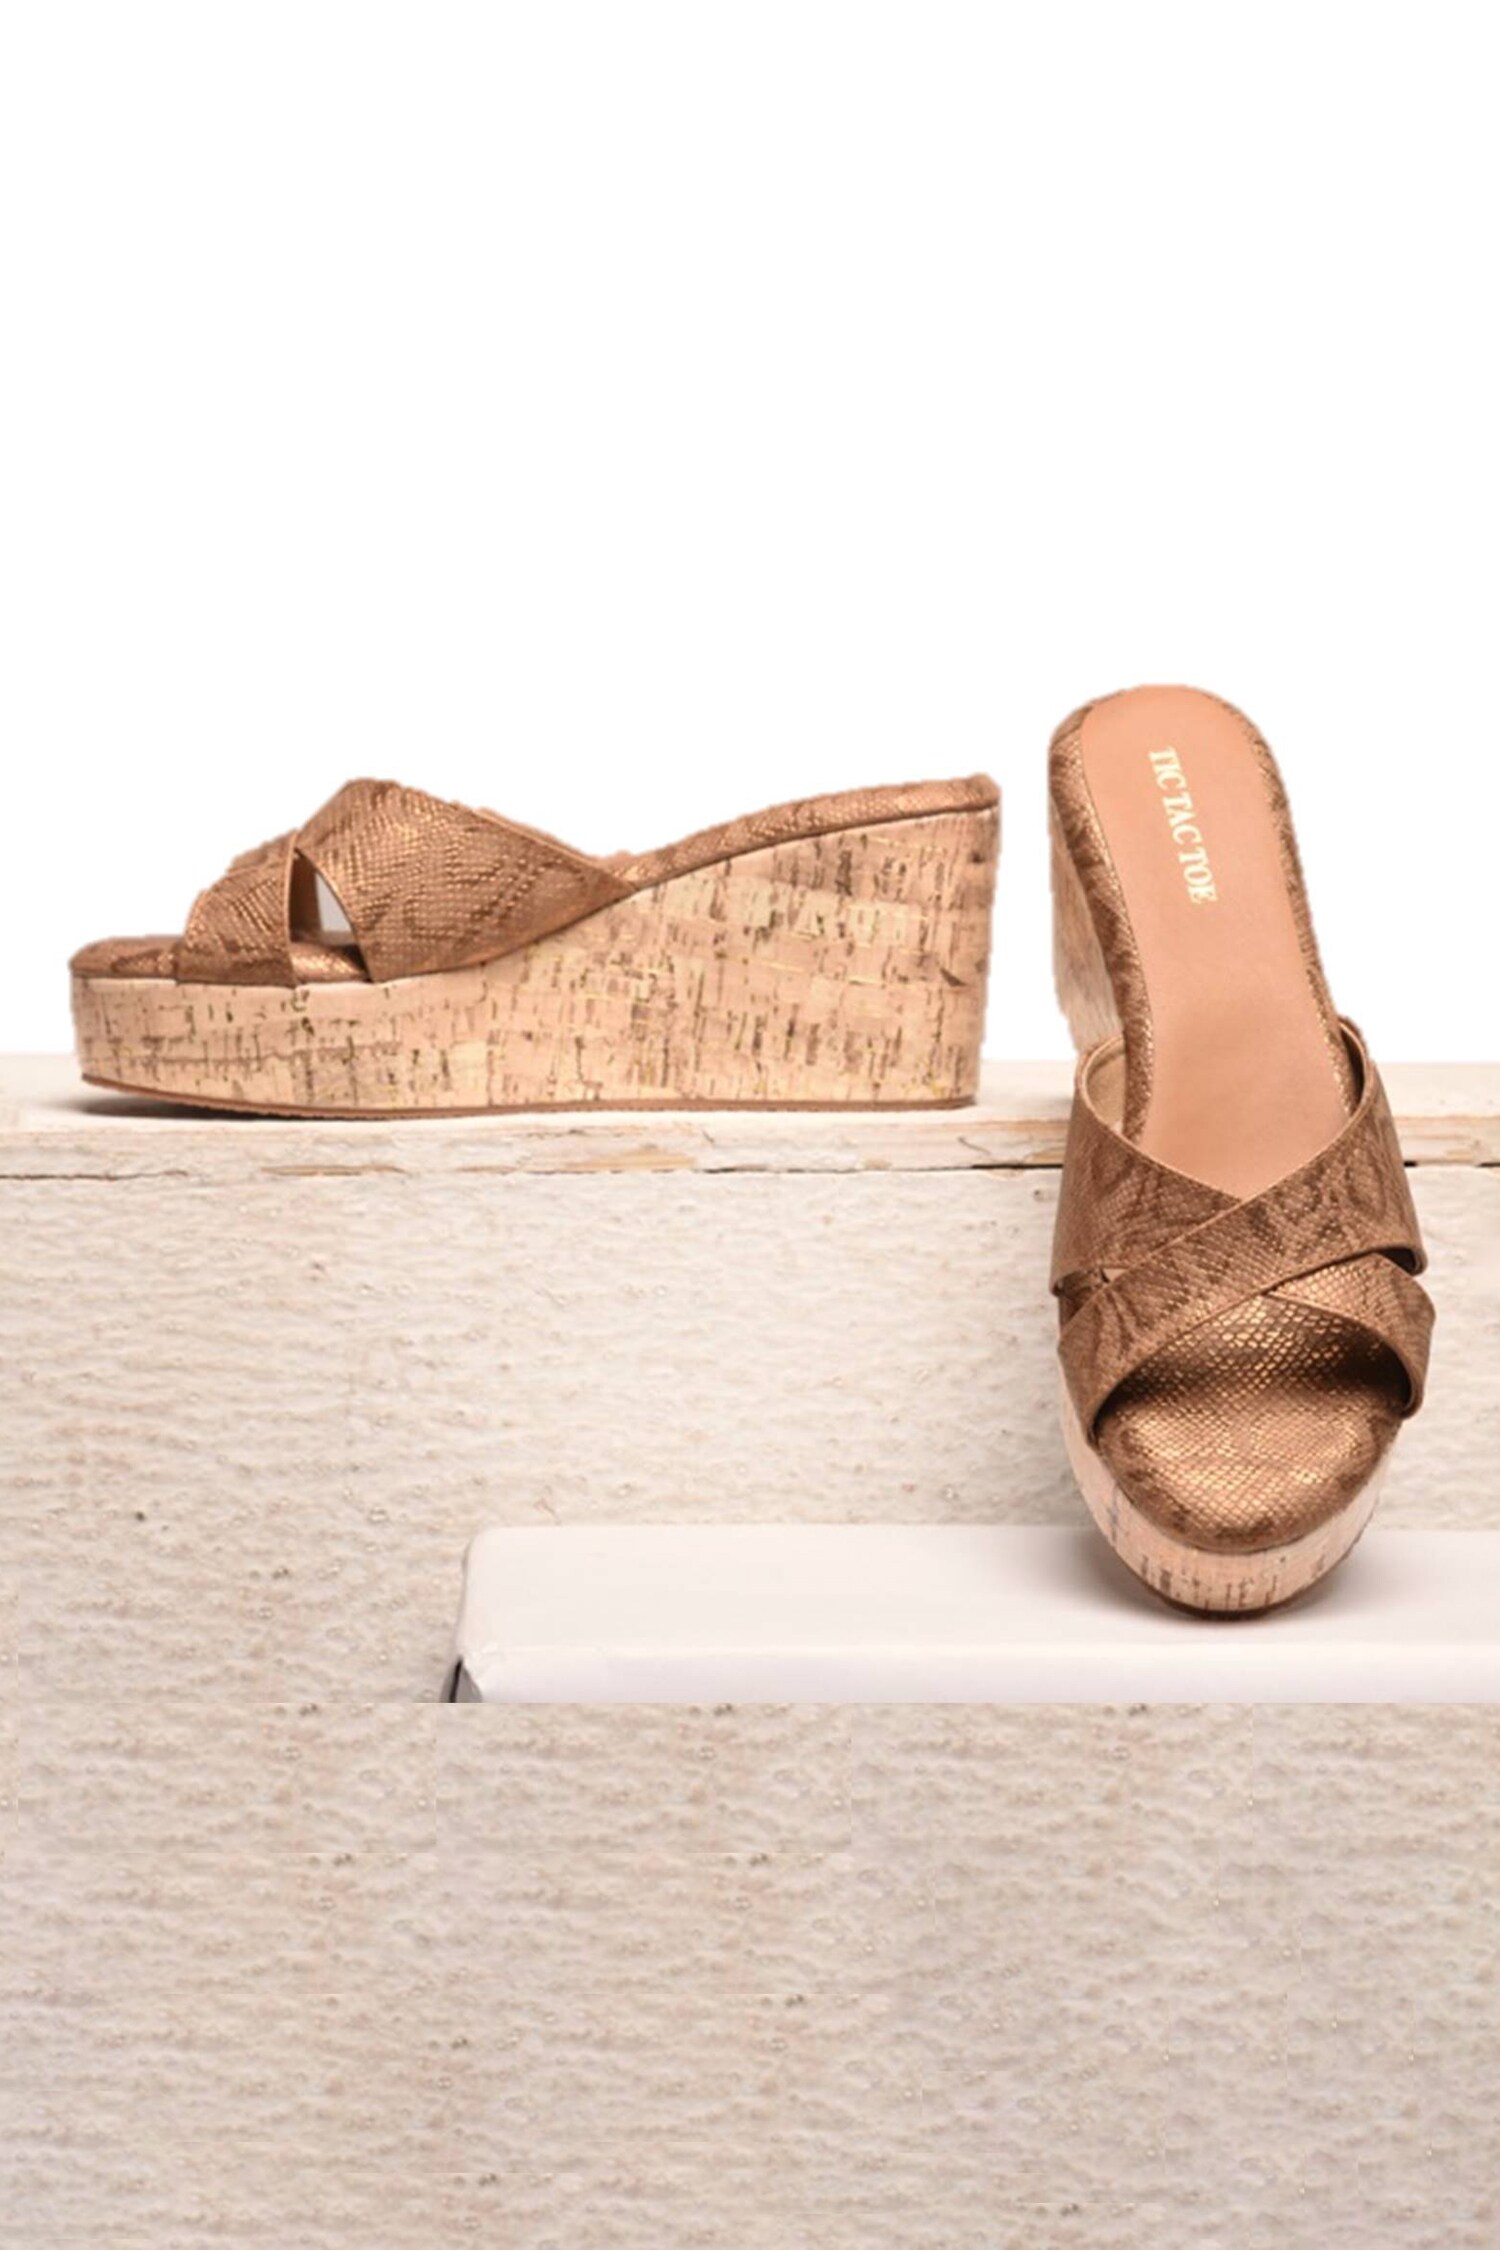 UGG Navy Cork Wedge Sandals 7.5 new with box | Wedge sandals, Cork wedges  sandals, Uggs